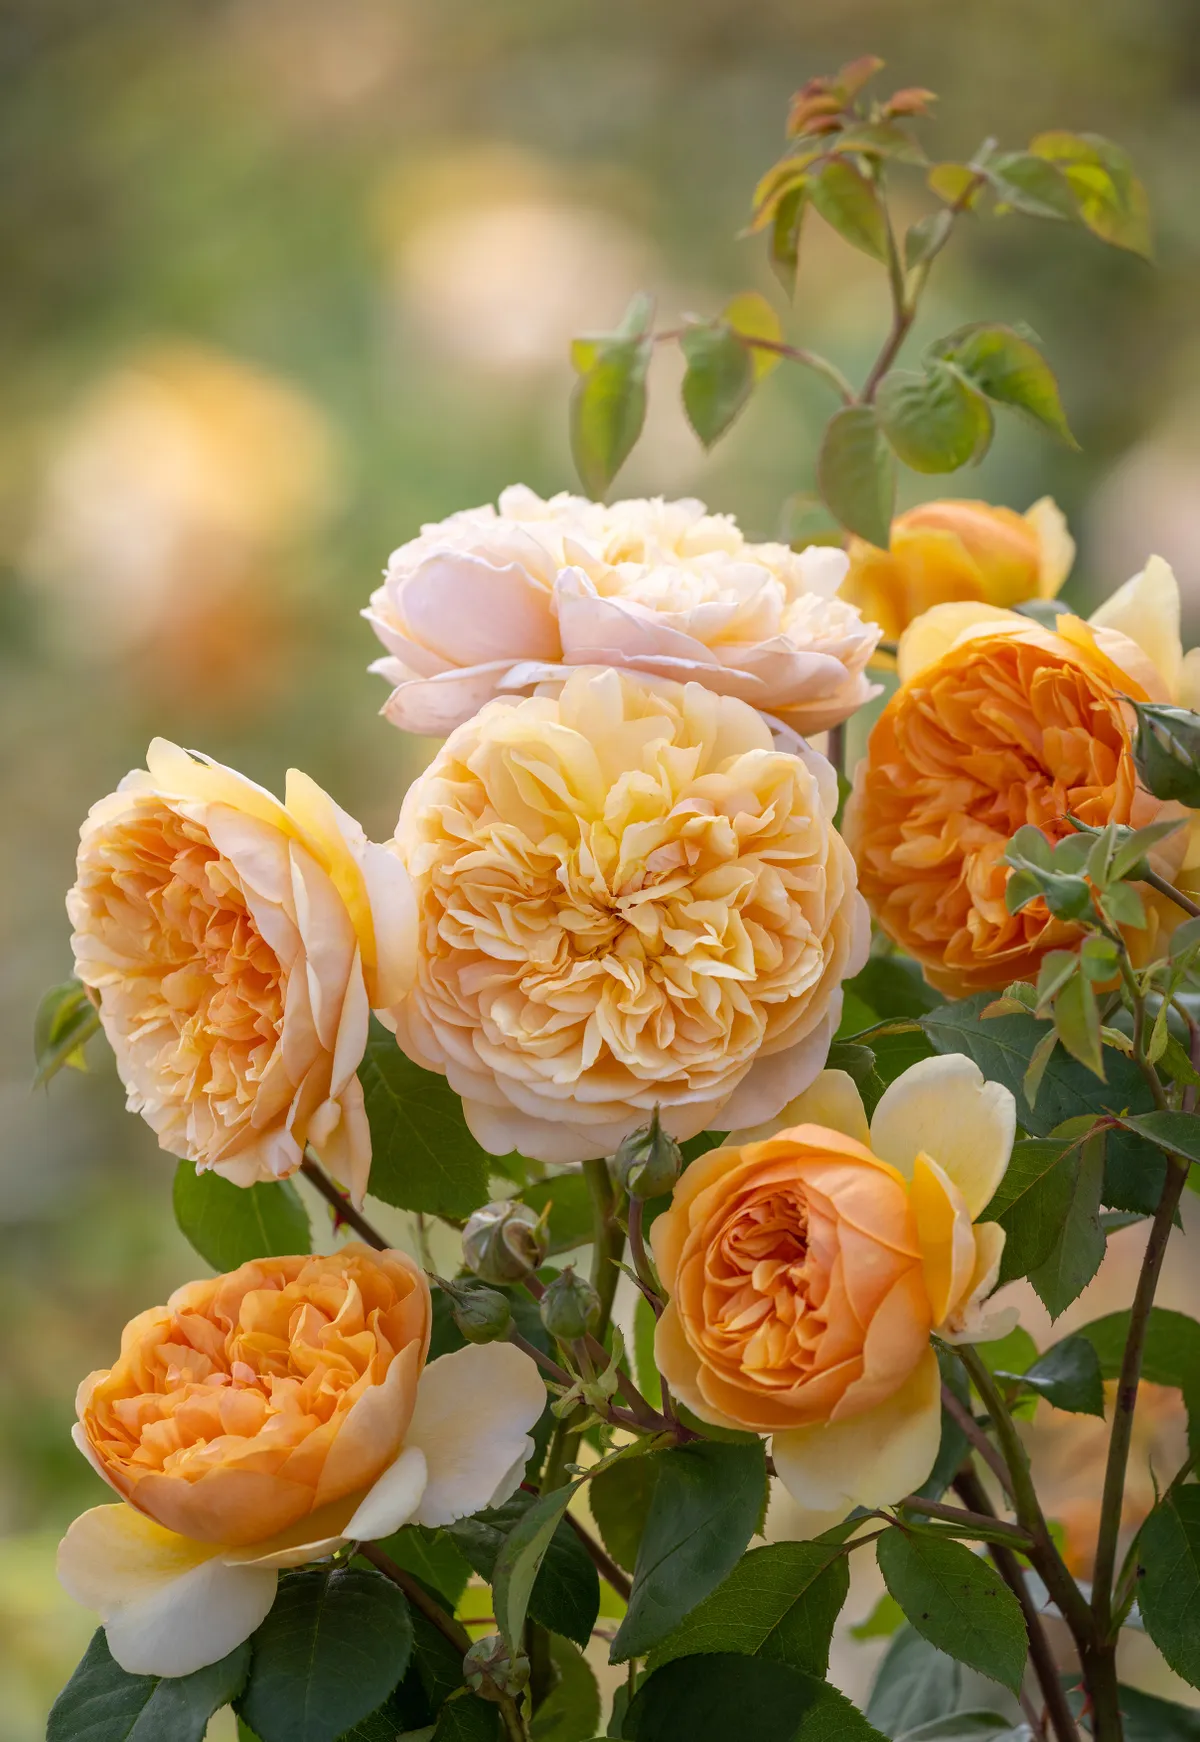 New rose: RHS Plant of the year shortlist